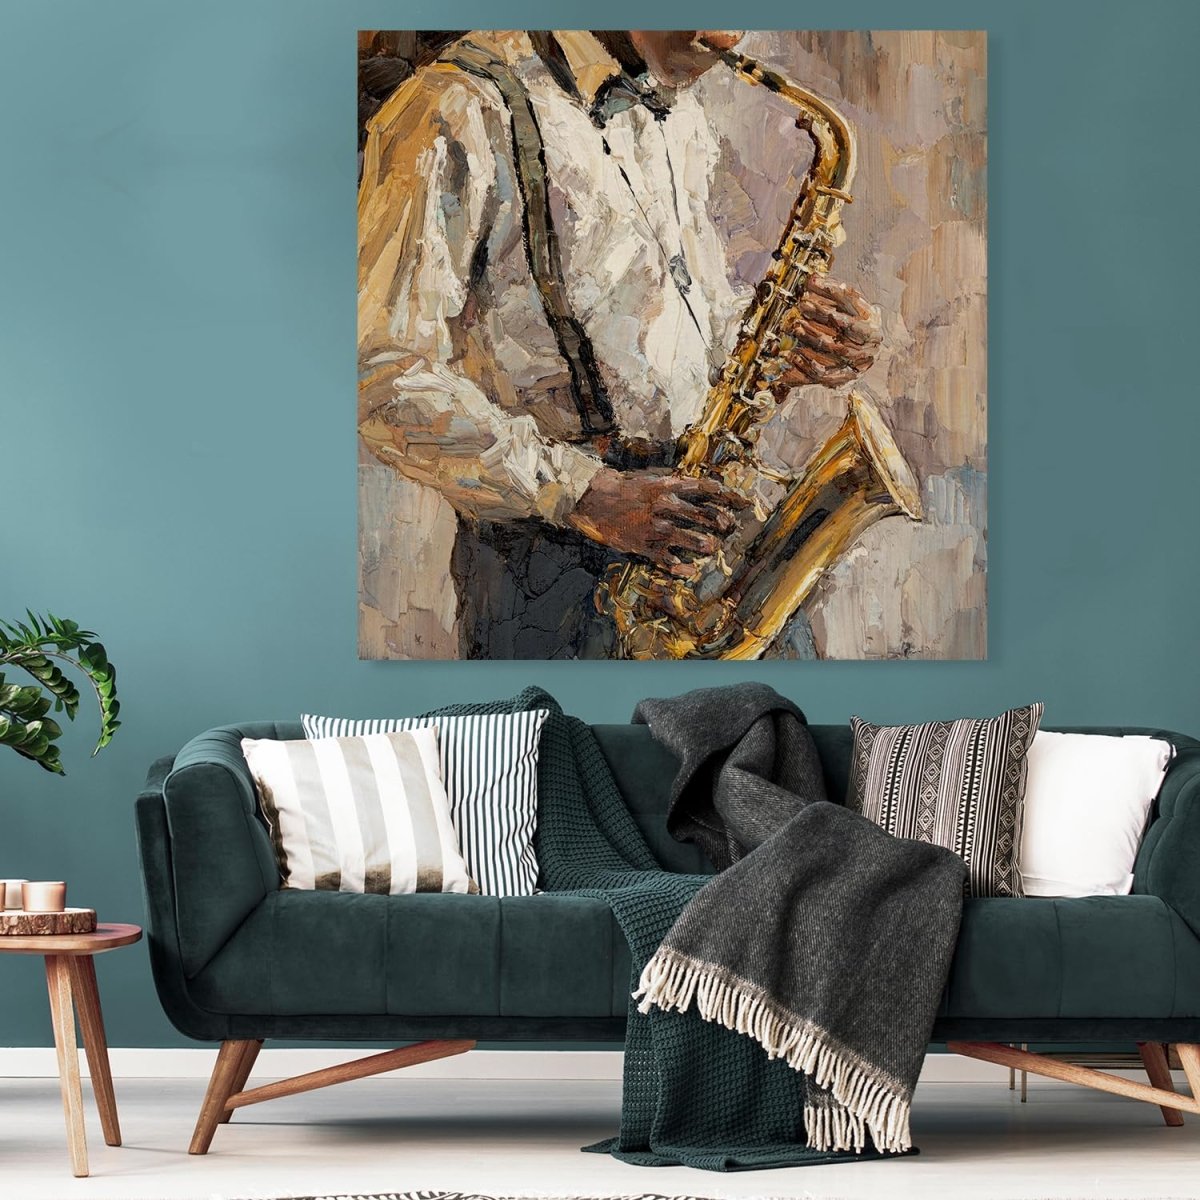 Metalkart Special Breathtaking Melody Wall Painting (36 x 36 Inches)